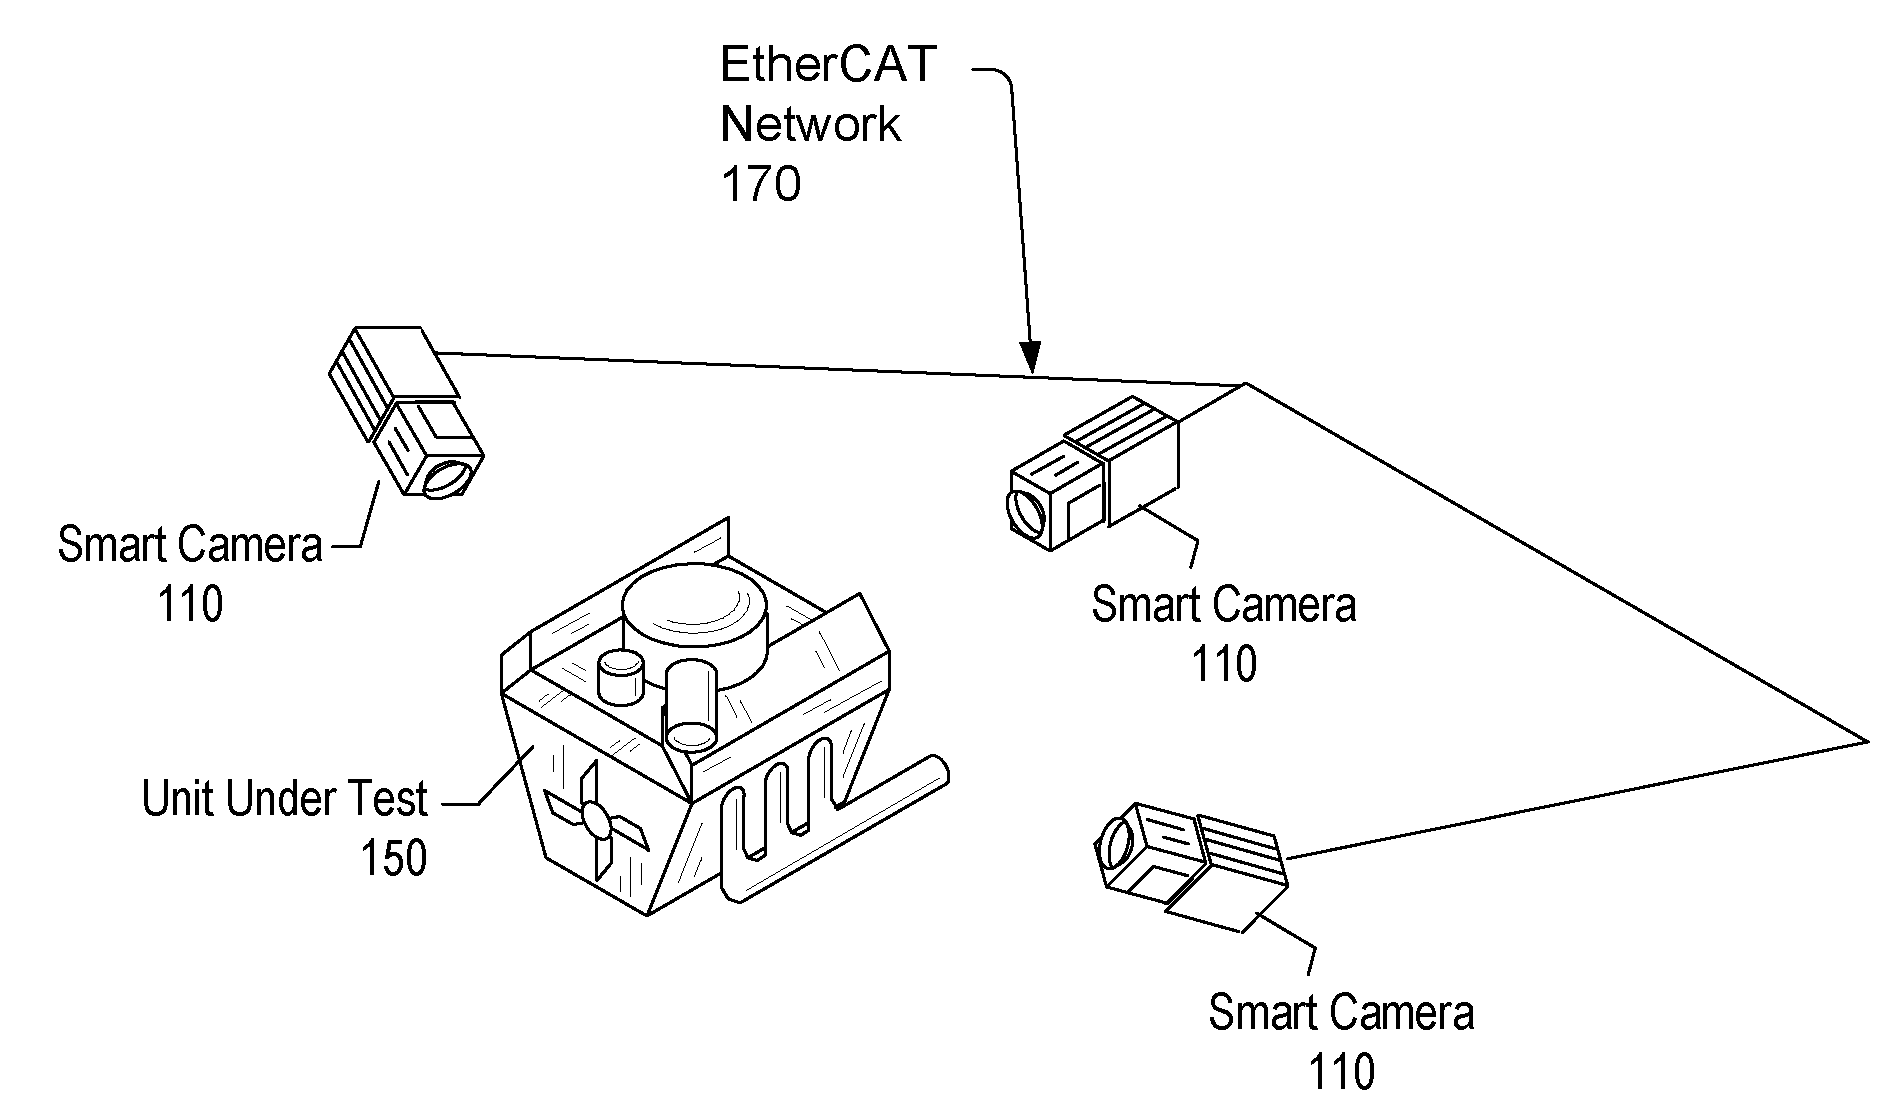 Vision System With Deterministic Low-Latency Communication